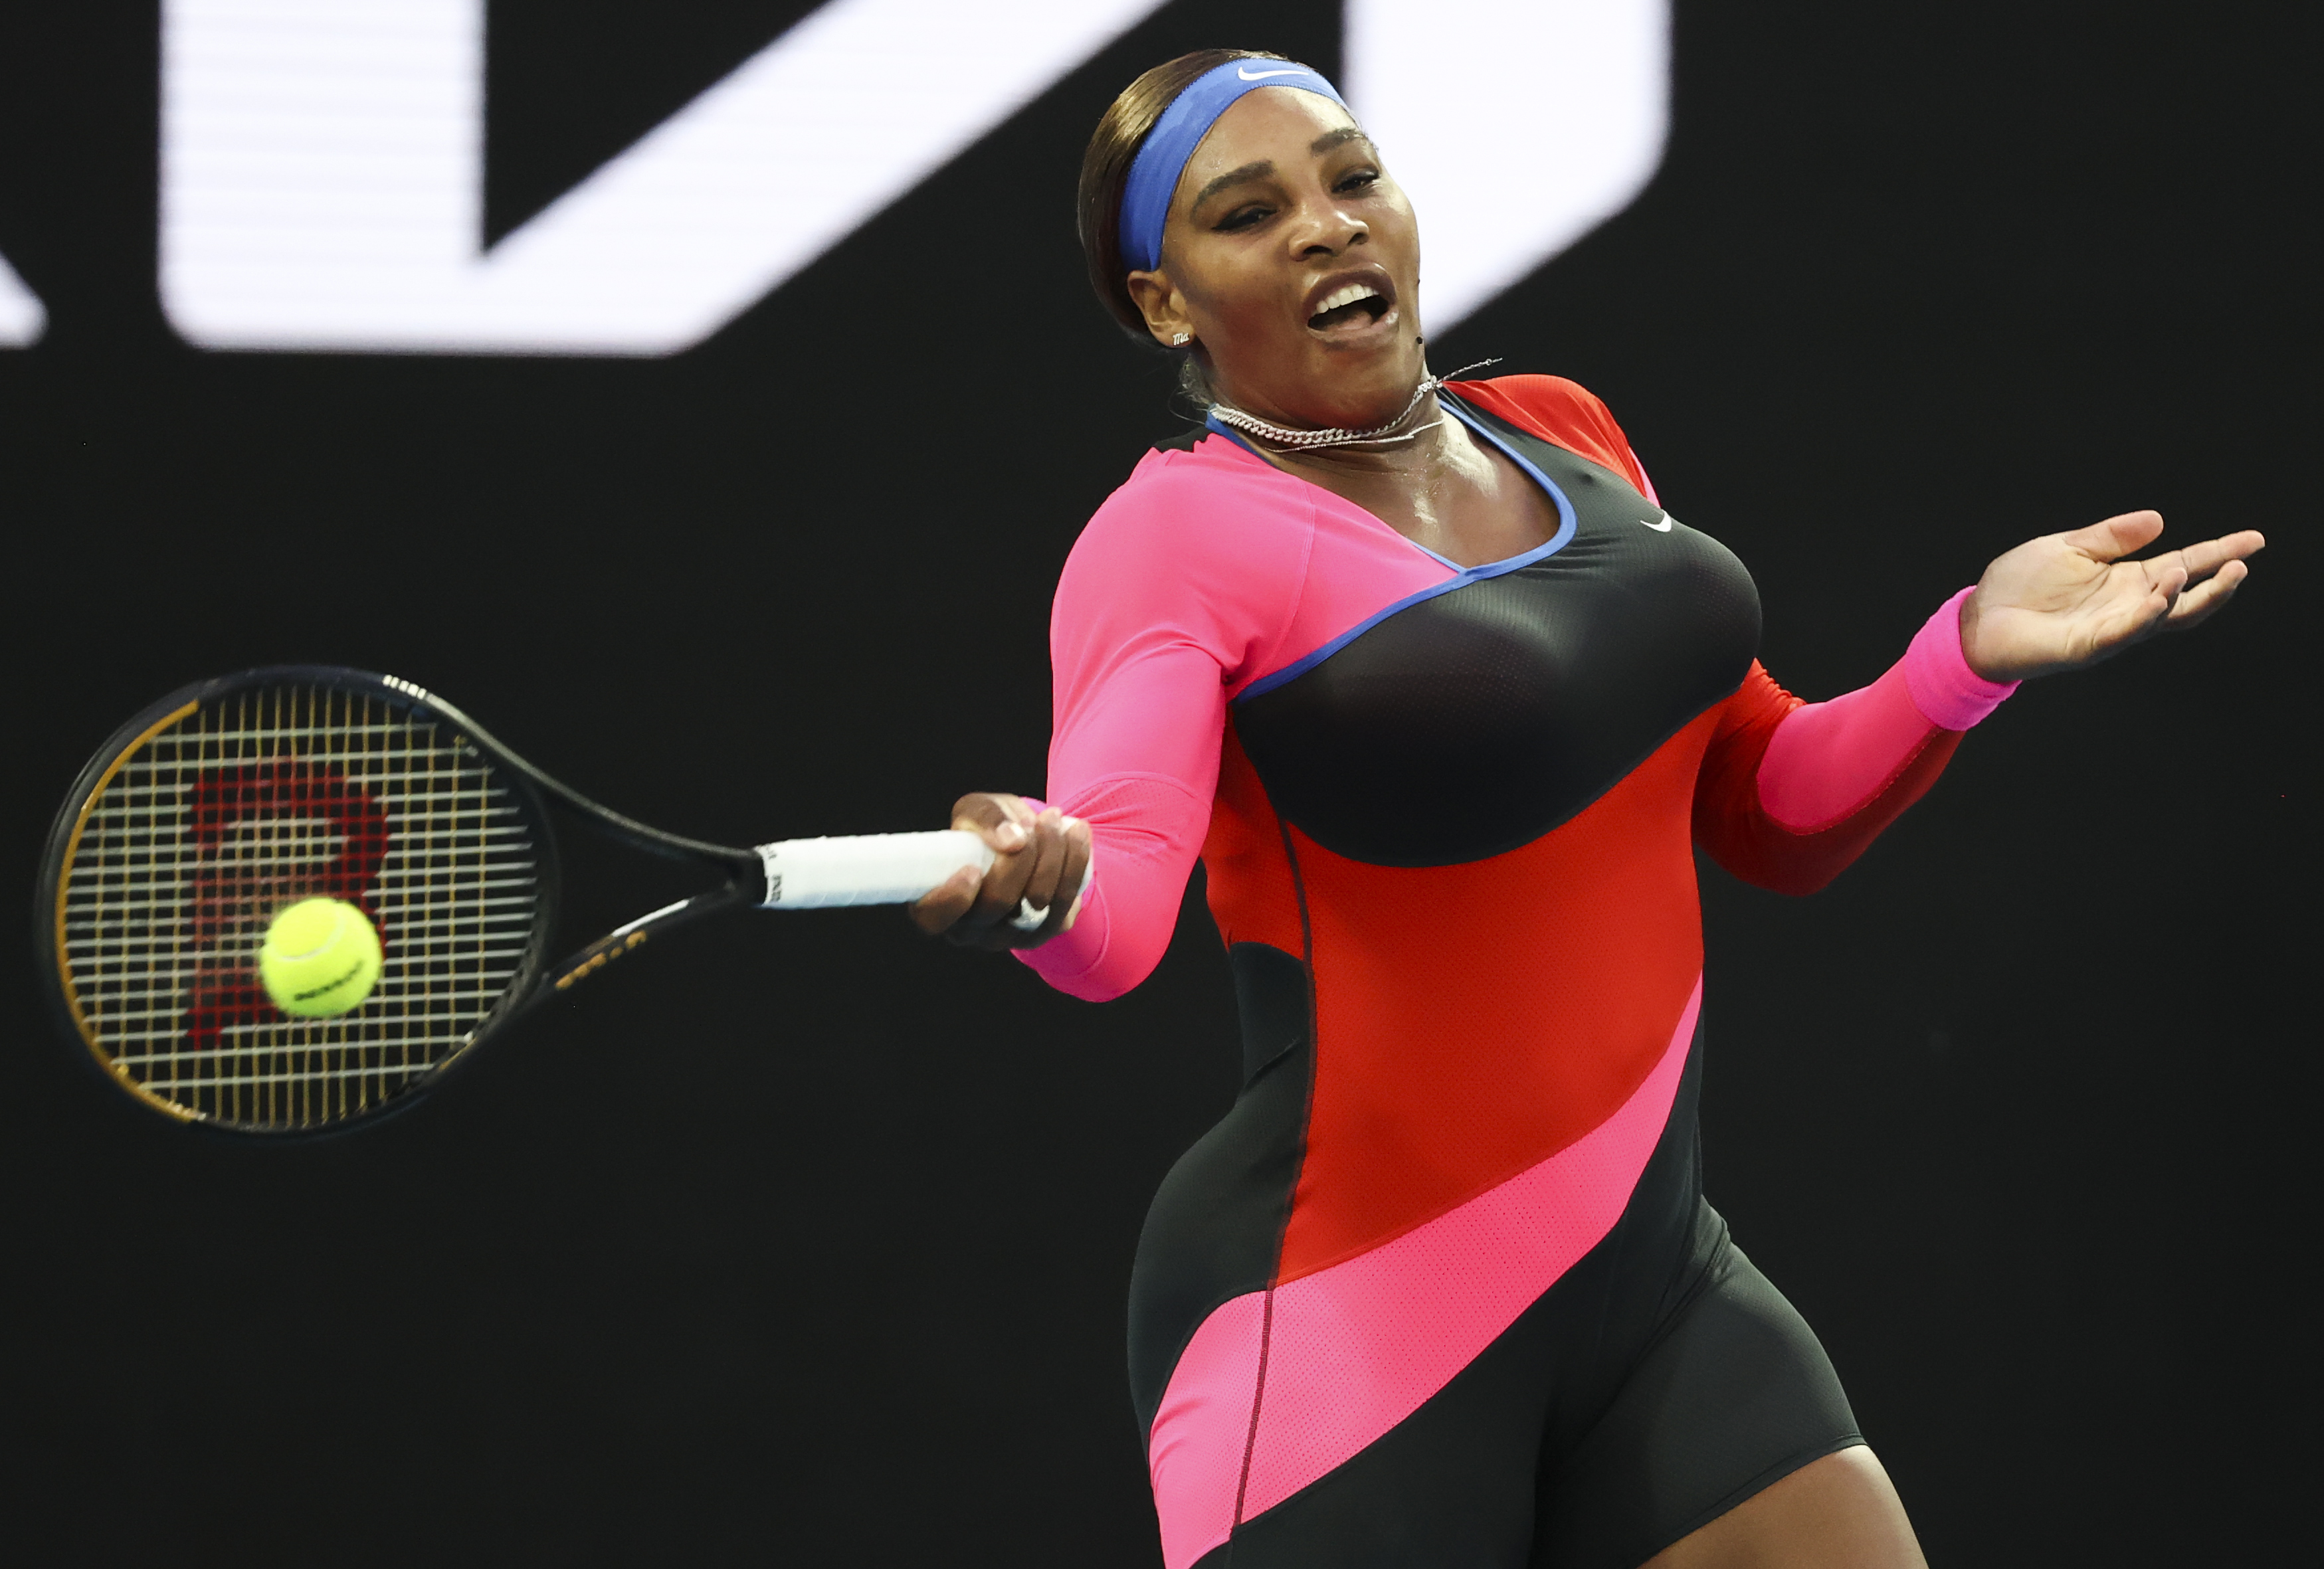 French Open 2021 Round of 16 TV schedule, time, live stream How to watch Serena Williams, Roger Federer, more